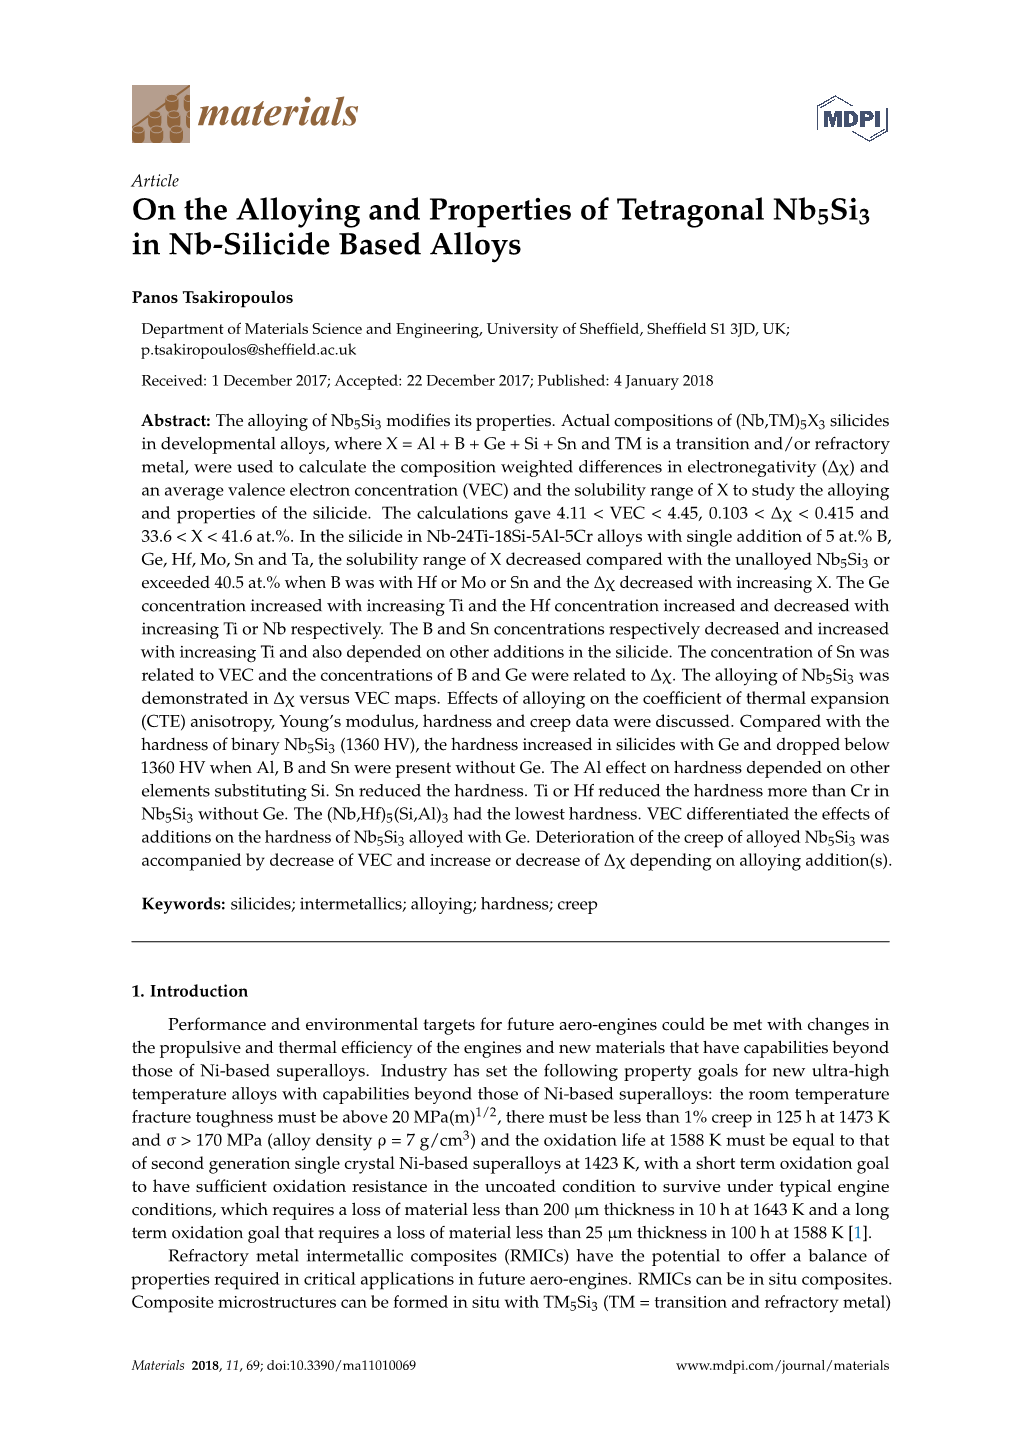 On the Alloying and Properties of Tetragonal Nb5si3 in Nb-Silicide Based Alloys